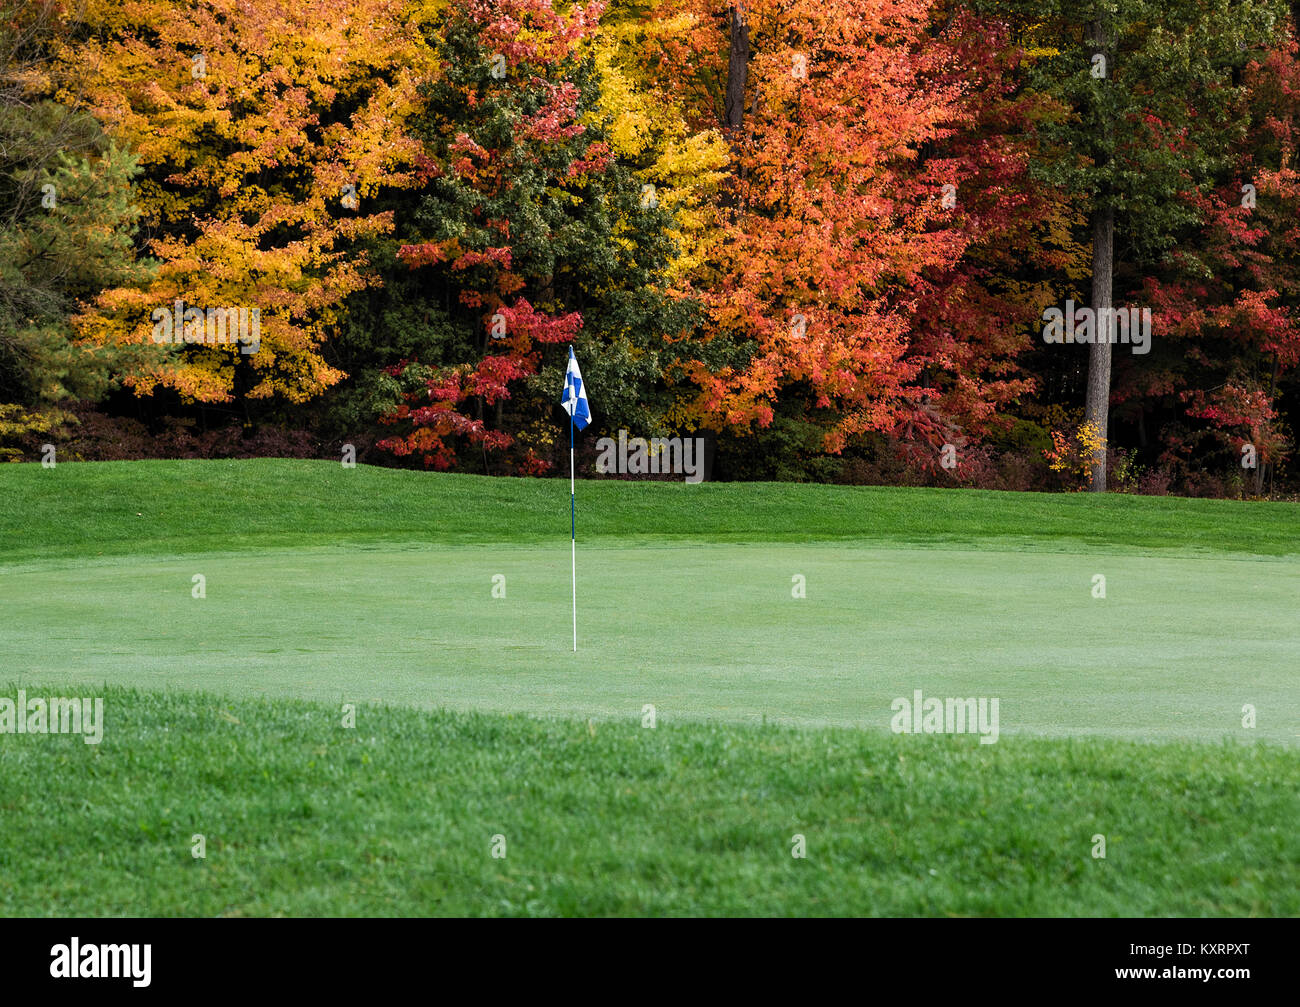 Golf course putting green with autumn foliage. Stock Photo